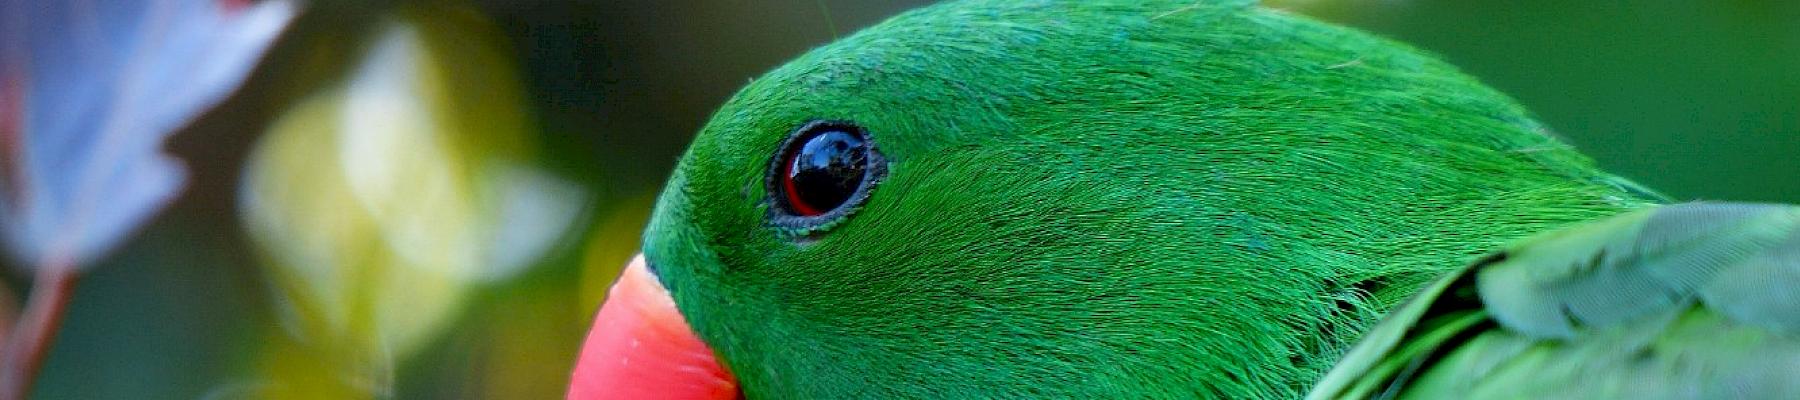 Eclectus Parrot are one of the bird species found in online trade.